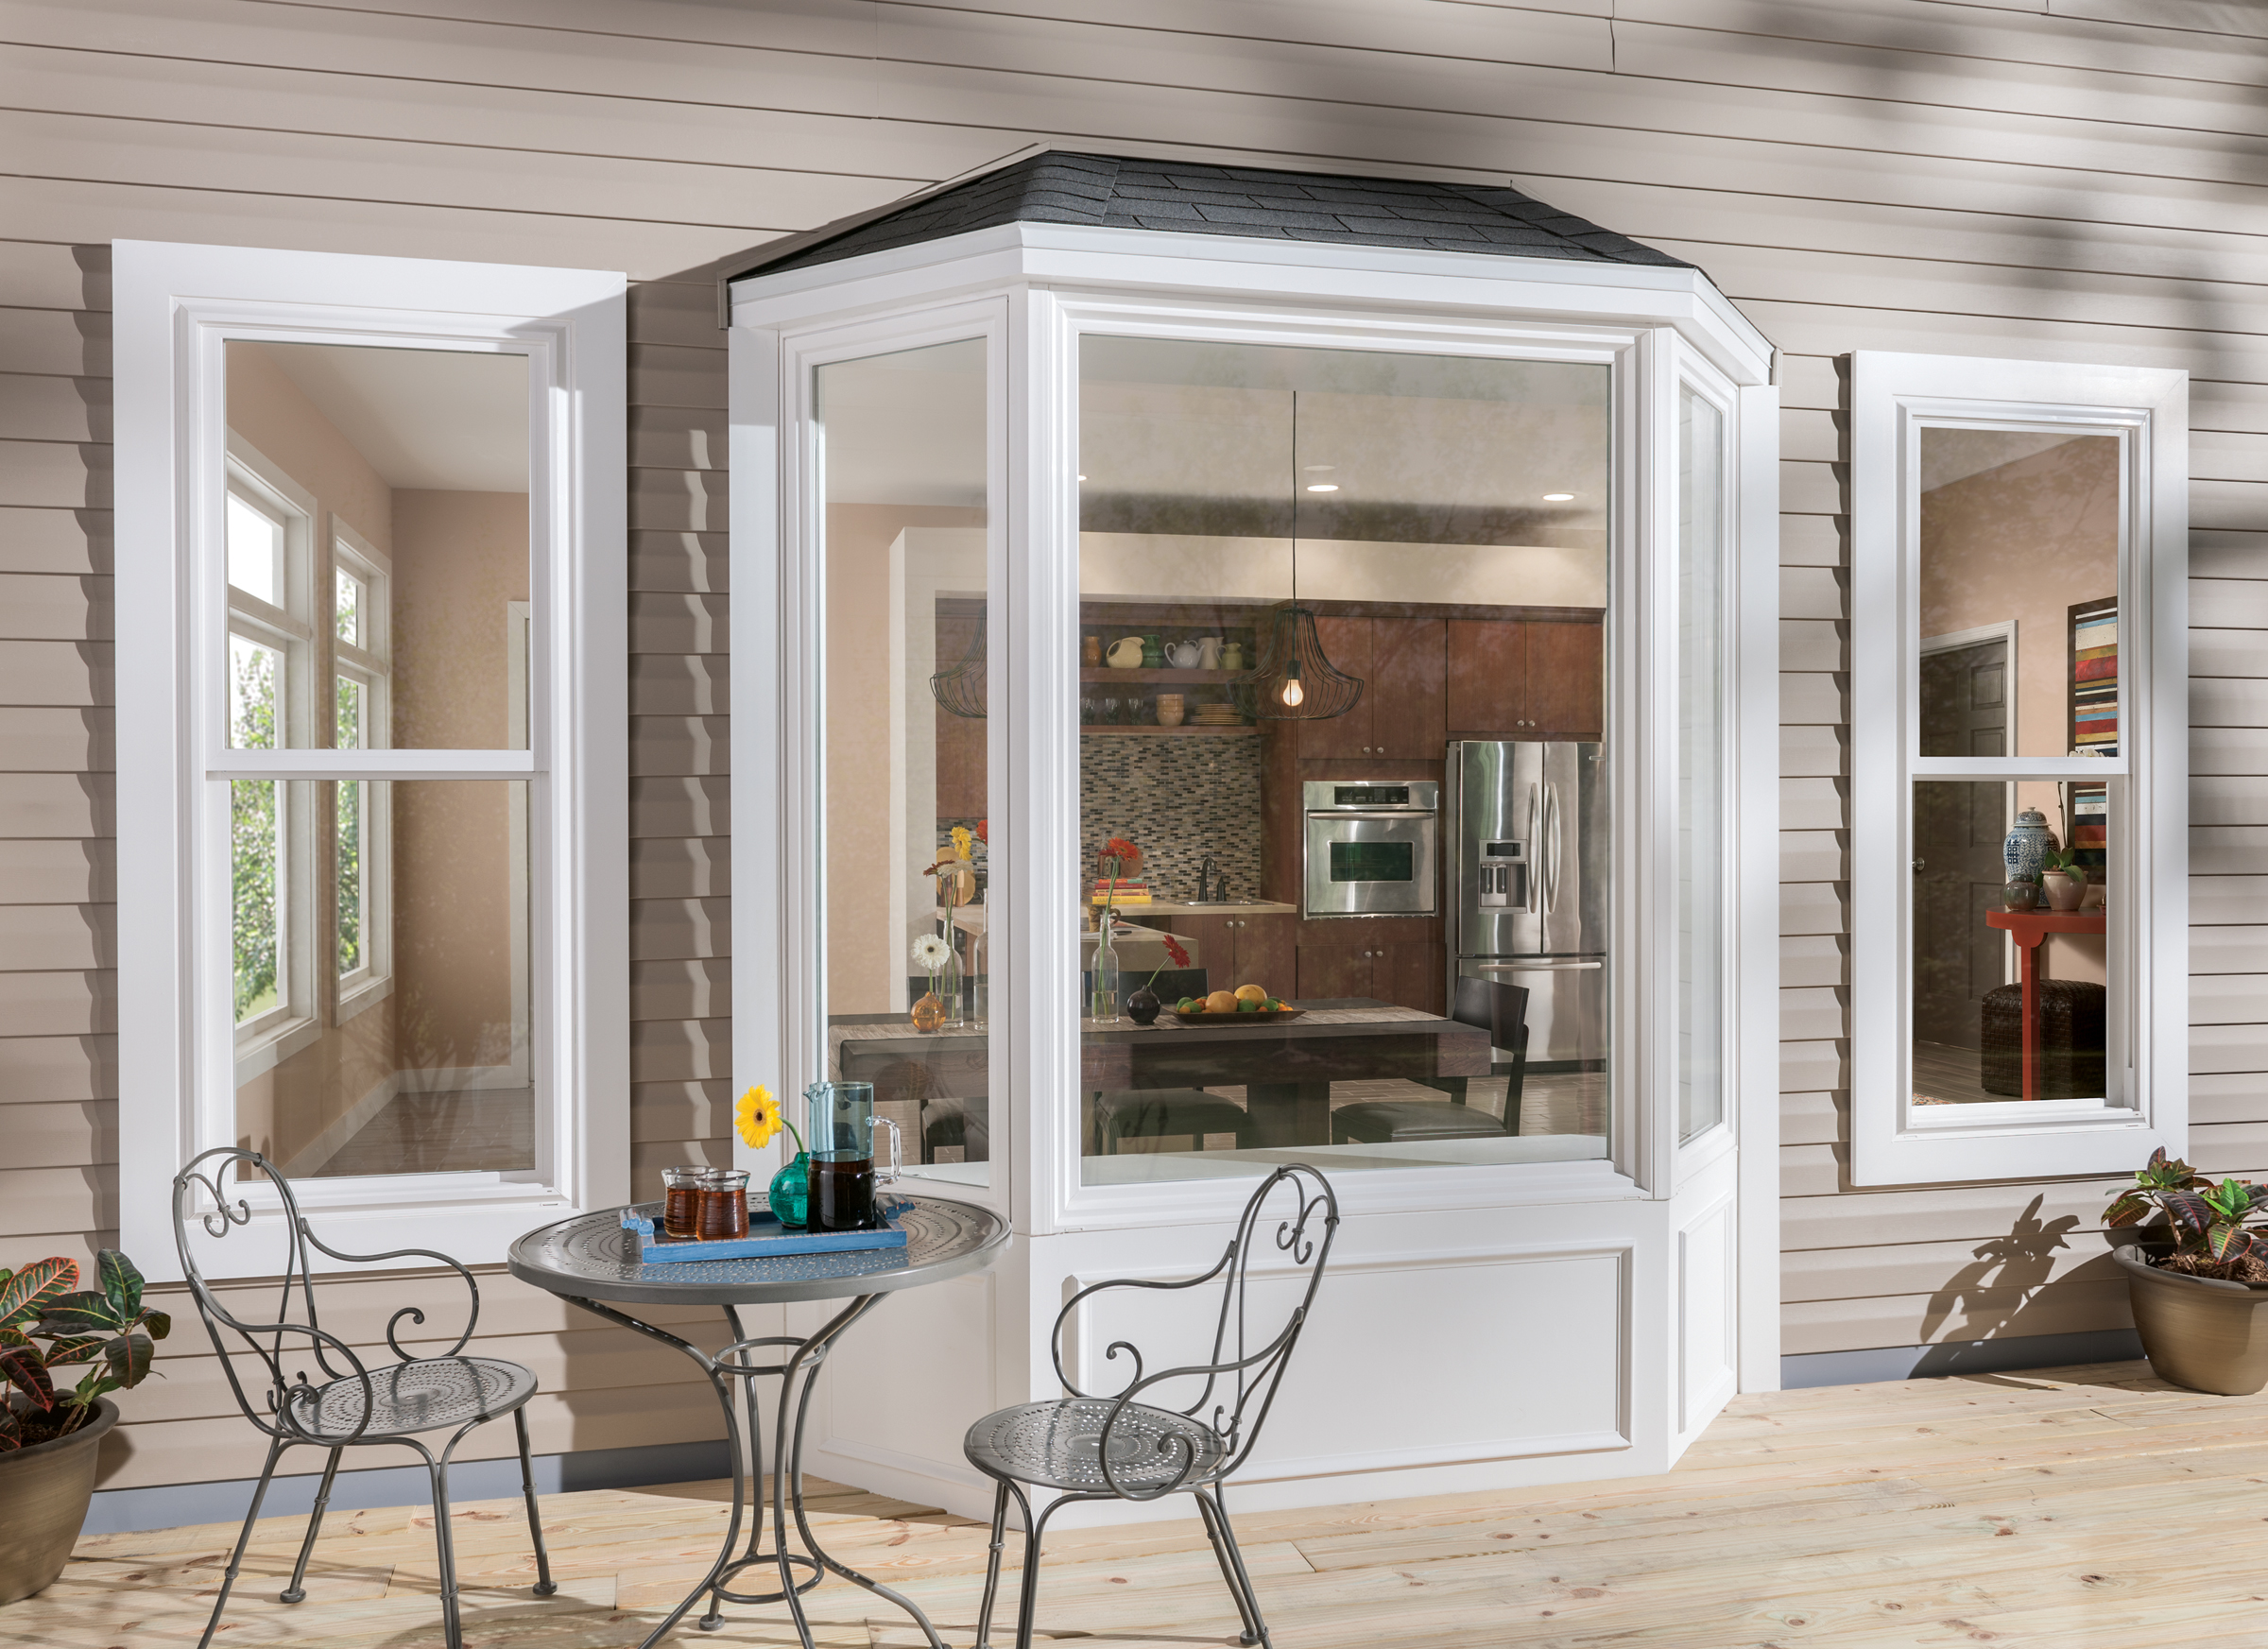 Tuscany® Series | V400 white bay windows from an exterior view with patio dining set